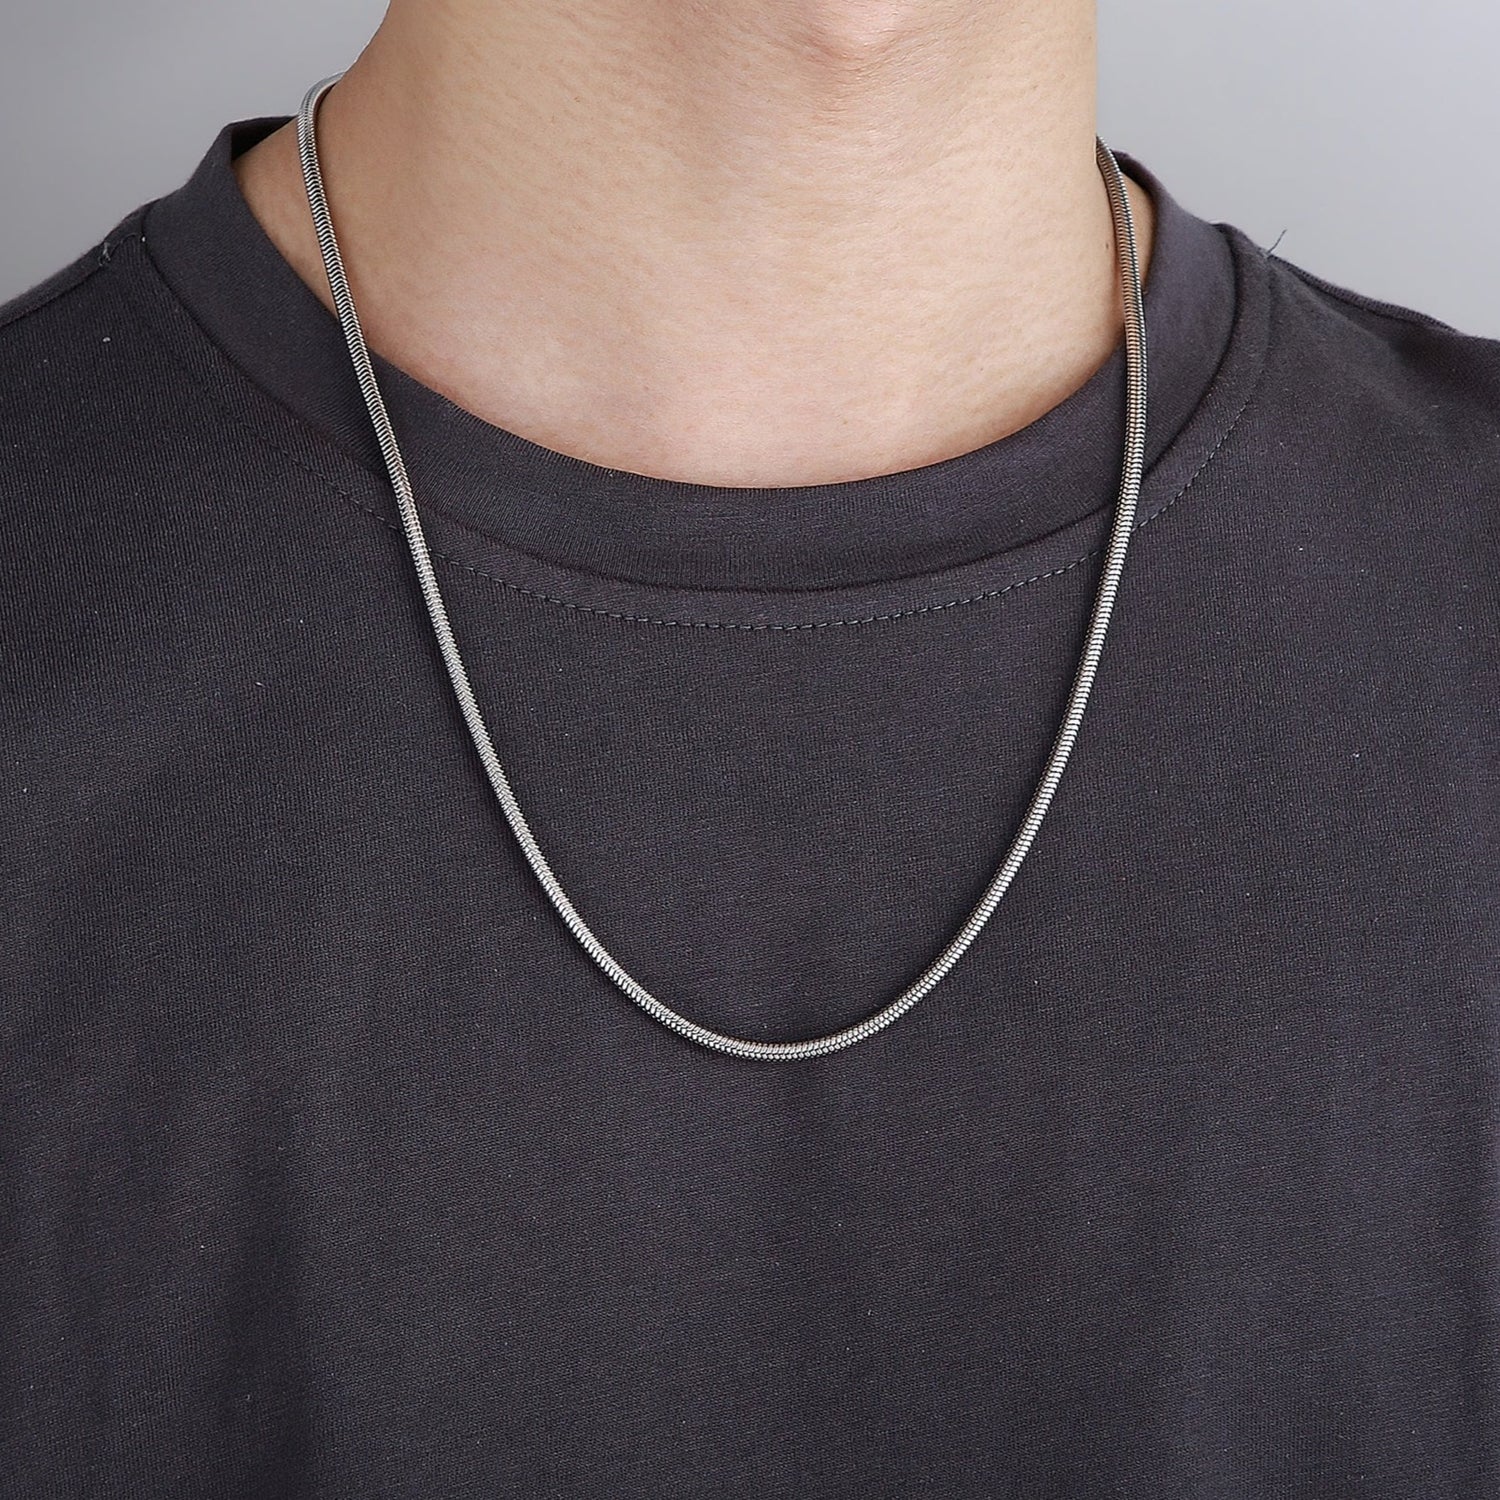 Zuringa mens snake chain necklace